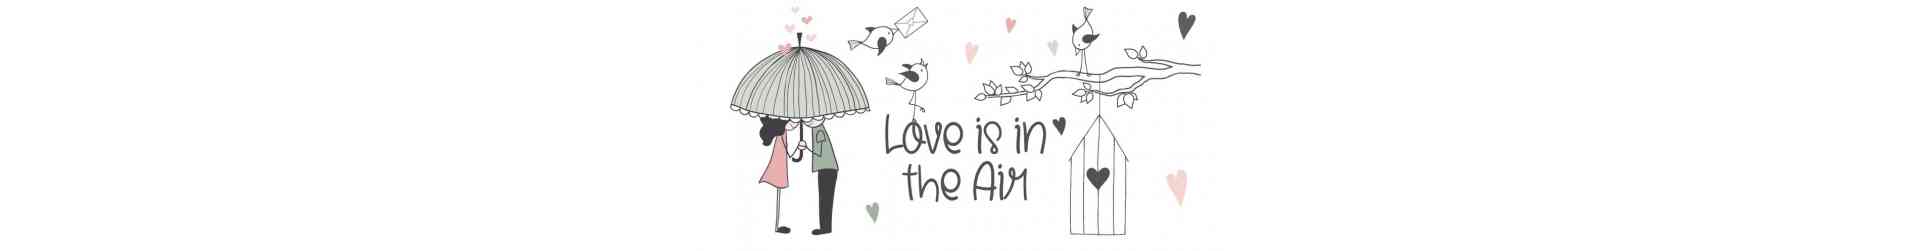 Love is in the air 